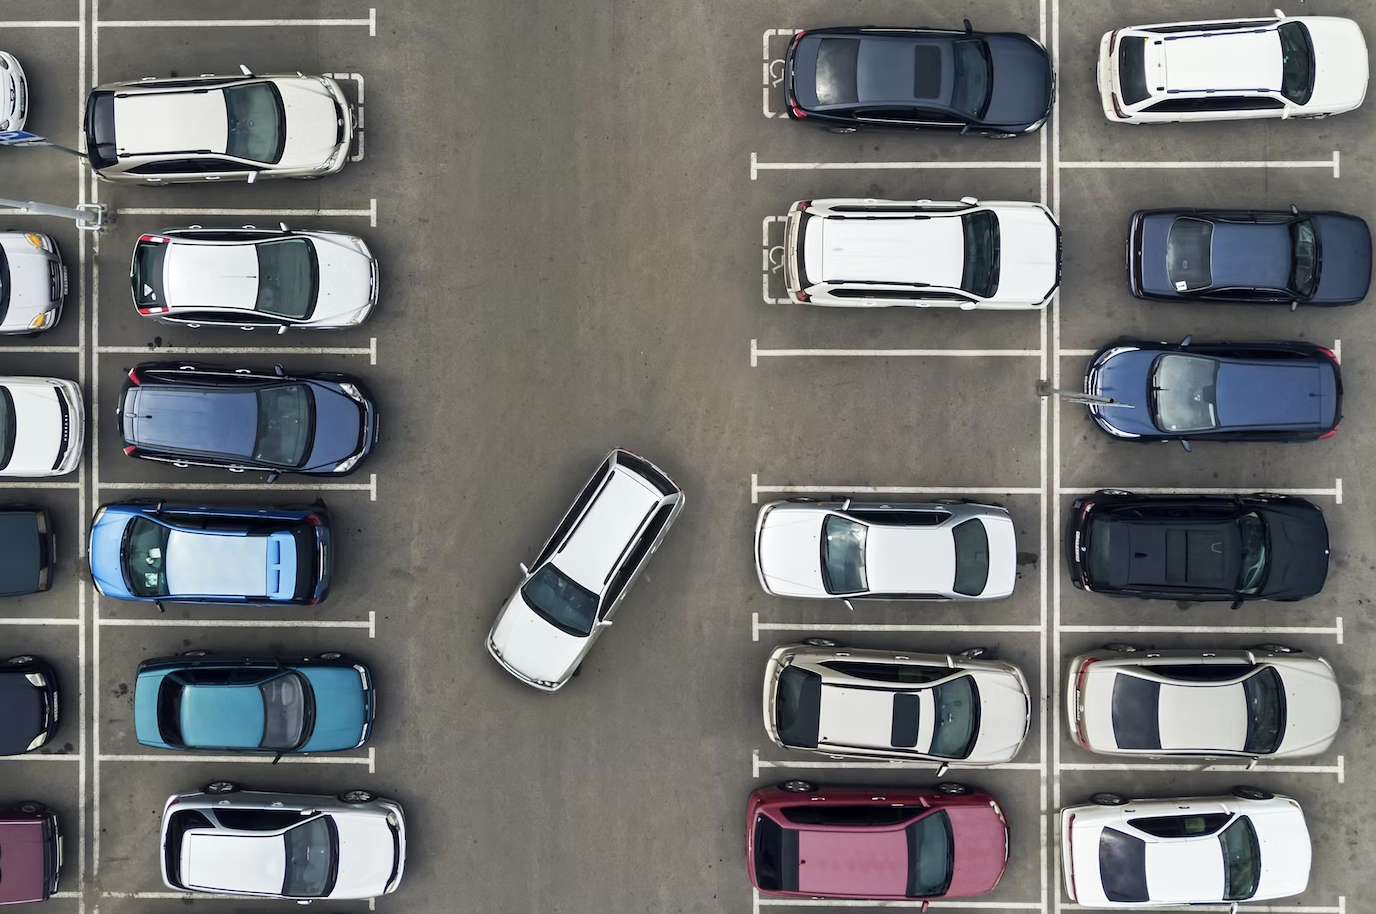 the great parking debate a research methods case study